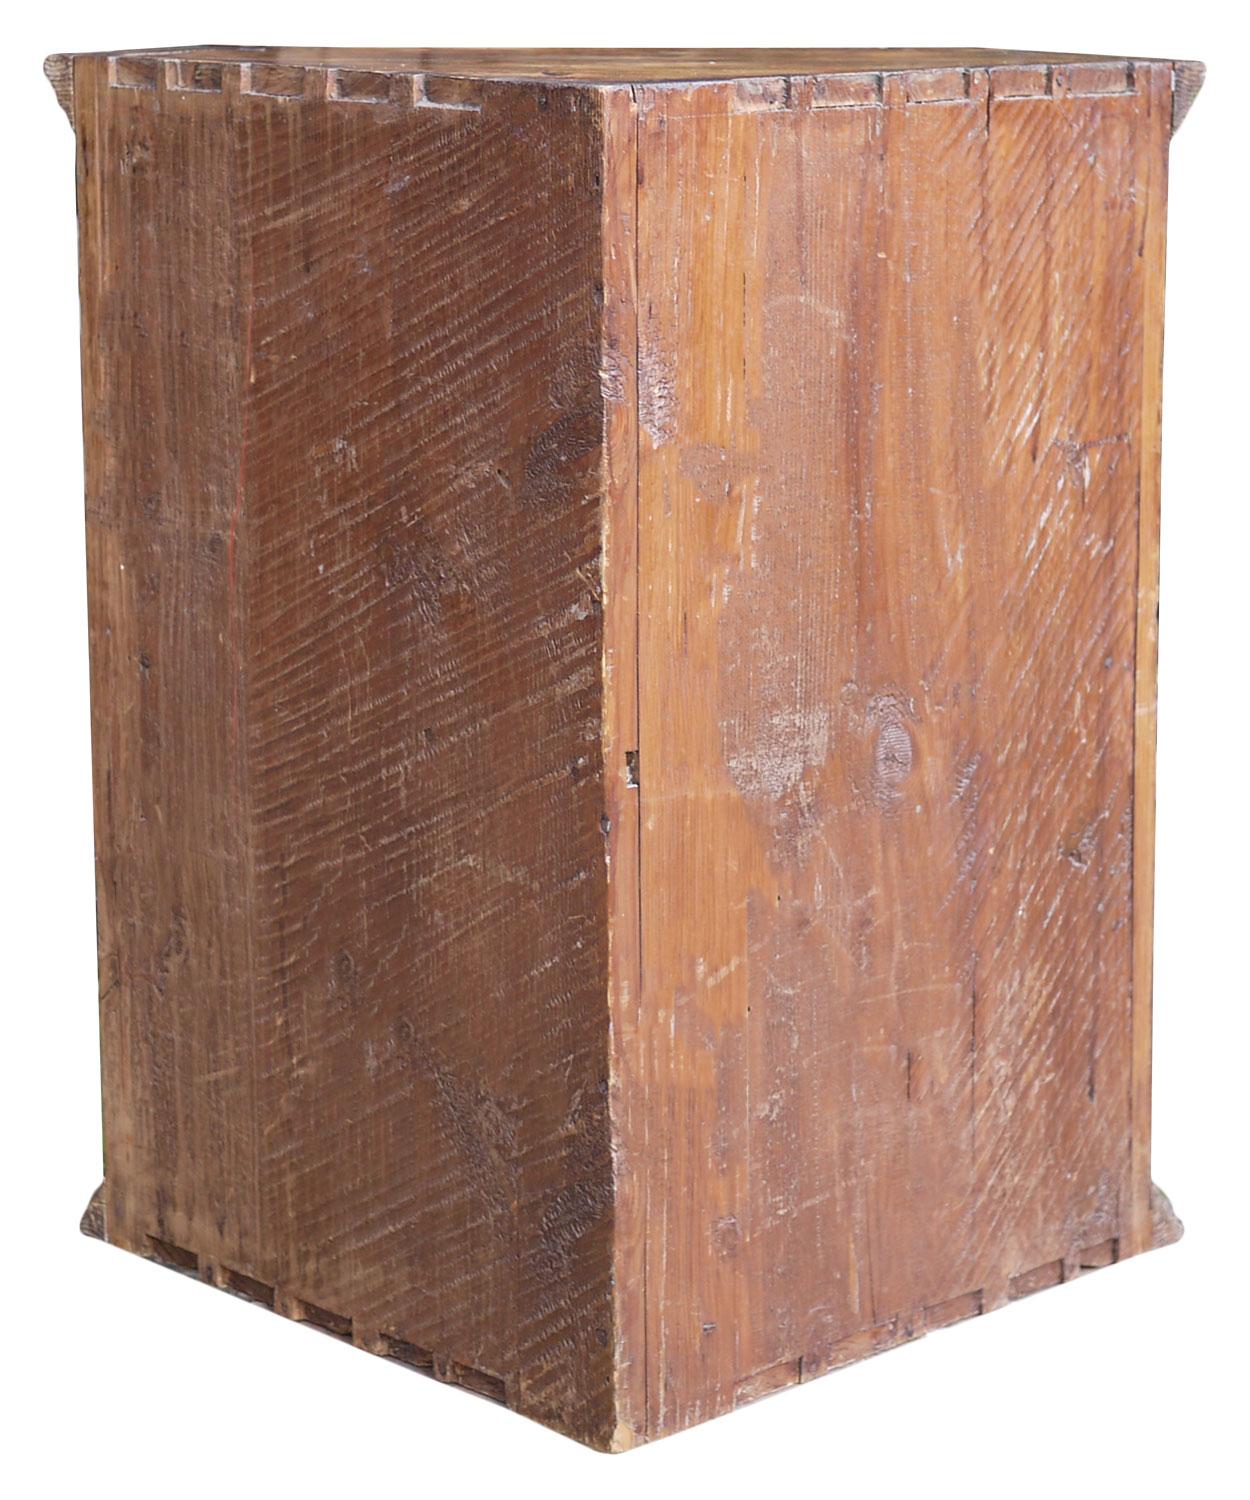 Early 19th Century Corner Cabinet in Fir Wood, Italy 1810 For Sale